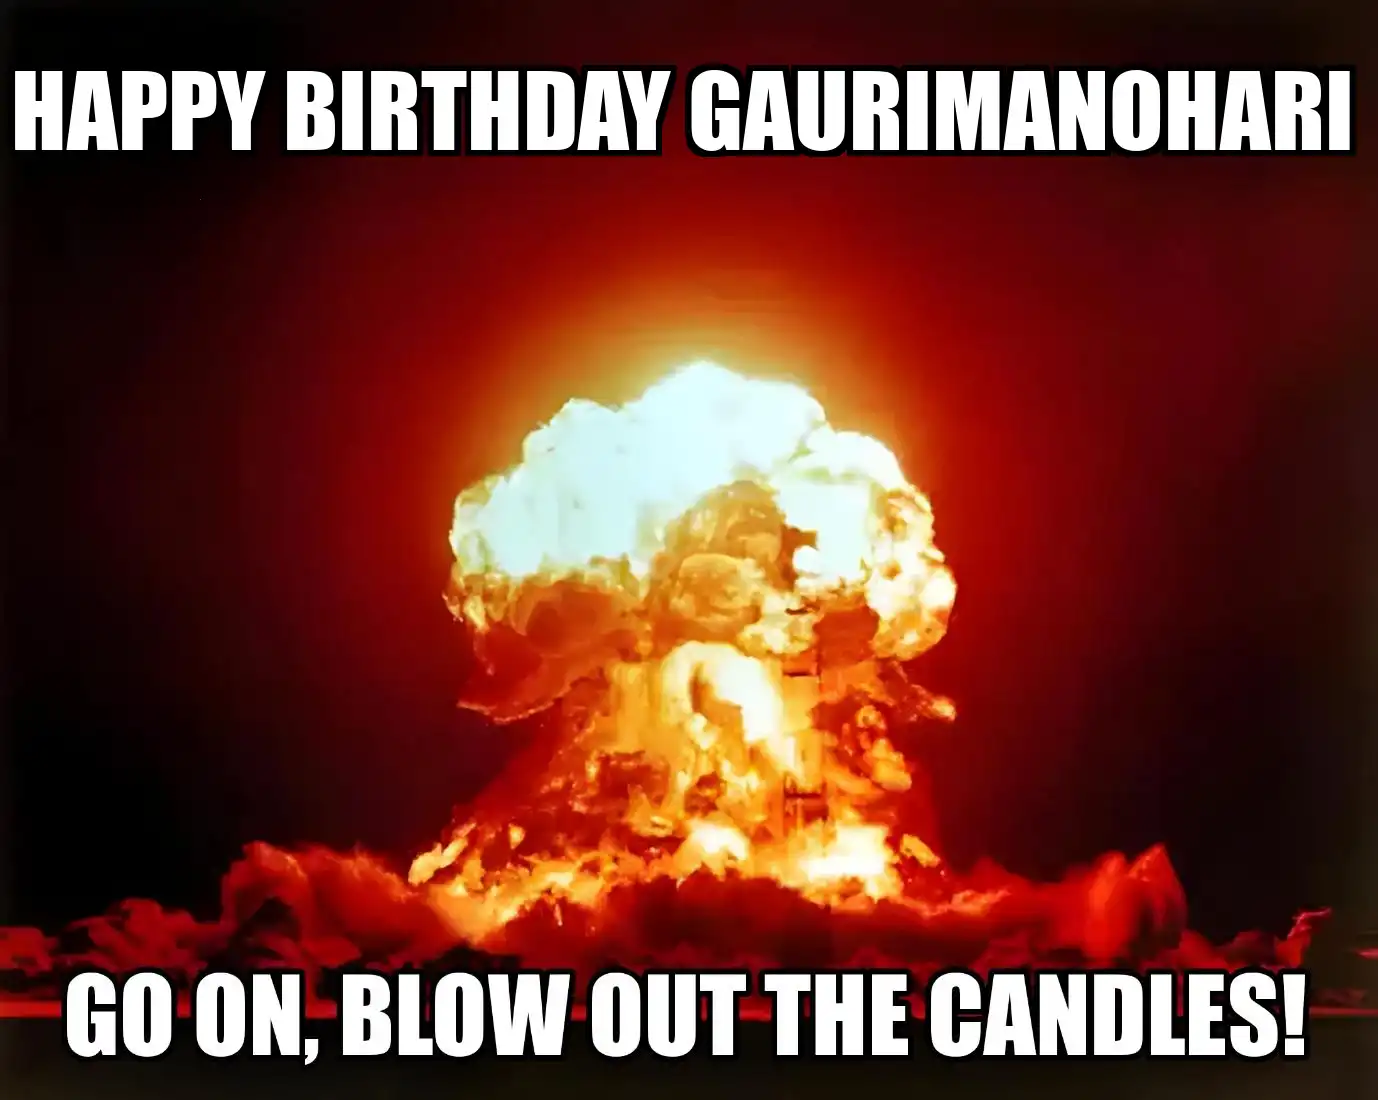 Happy Birthday Gaurimanohari Go On Blow Out The Candles Meme